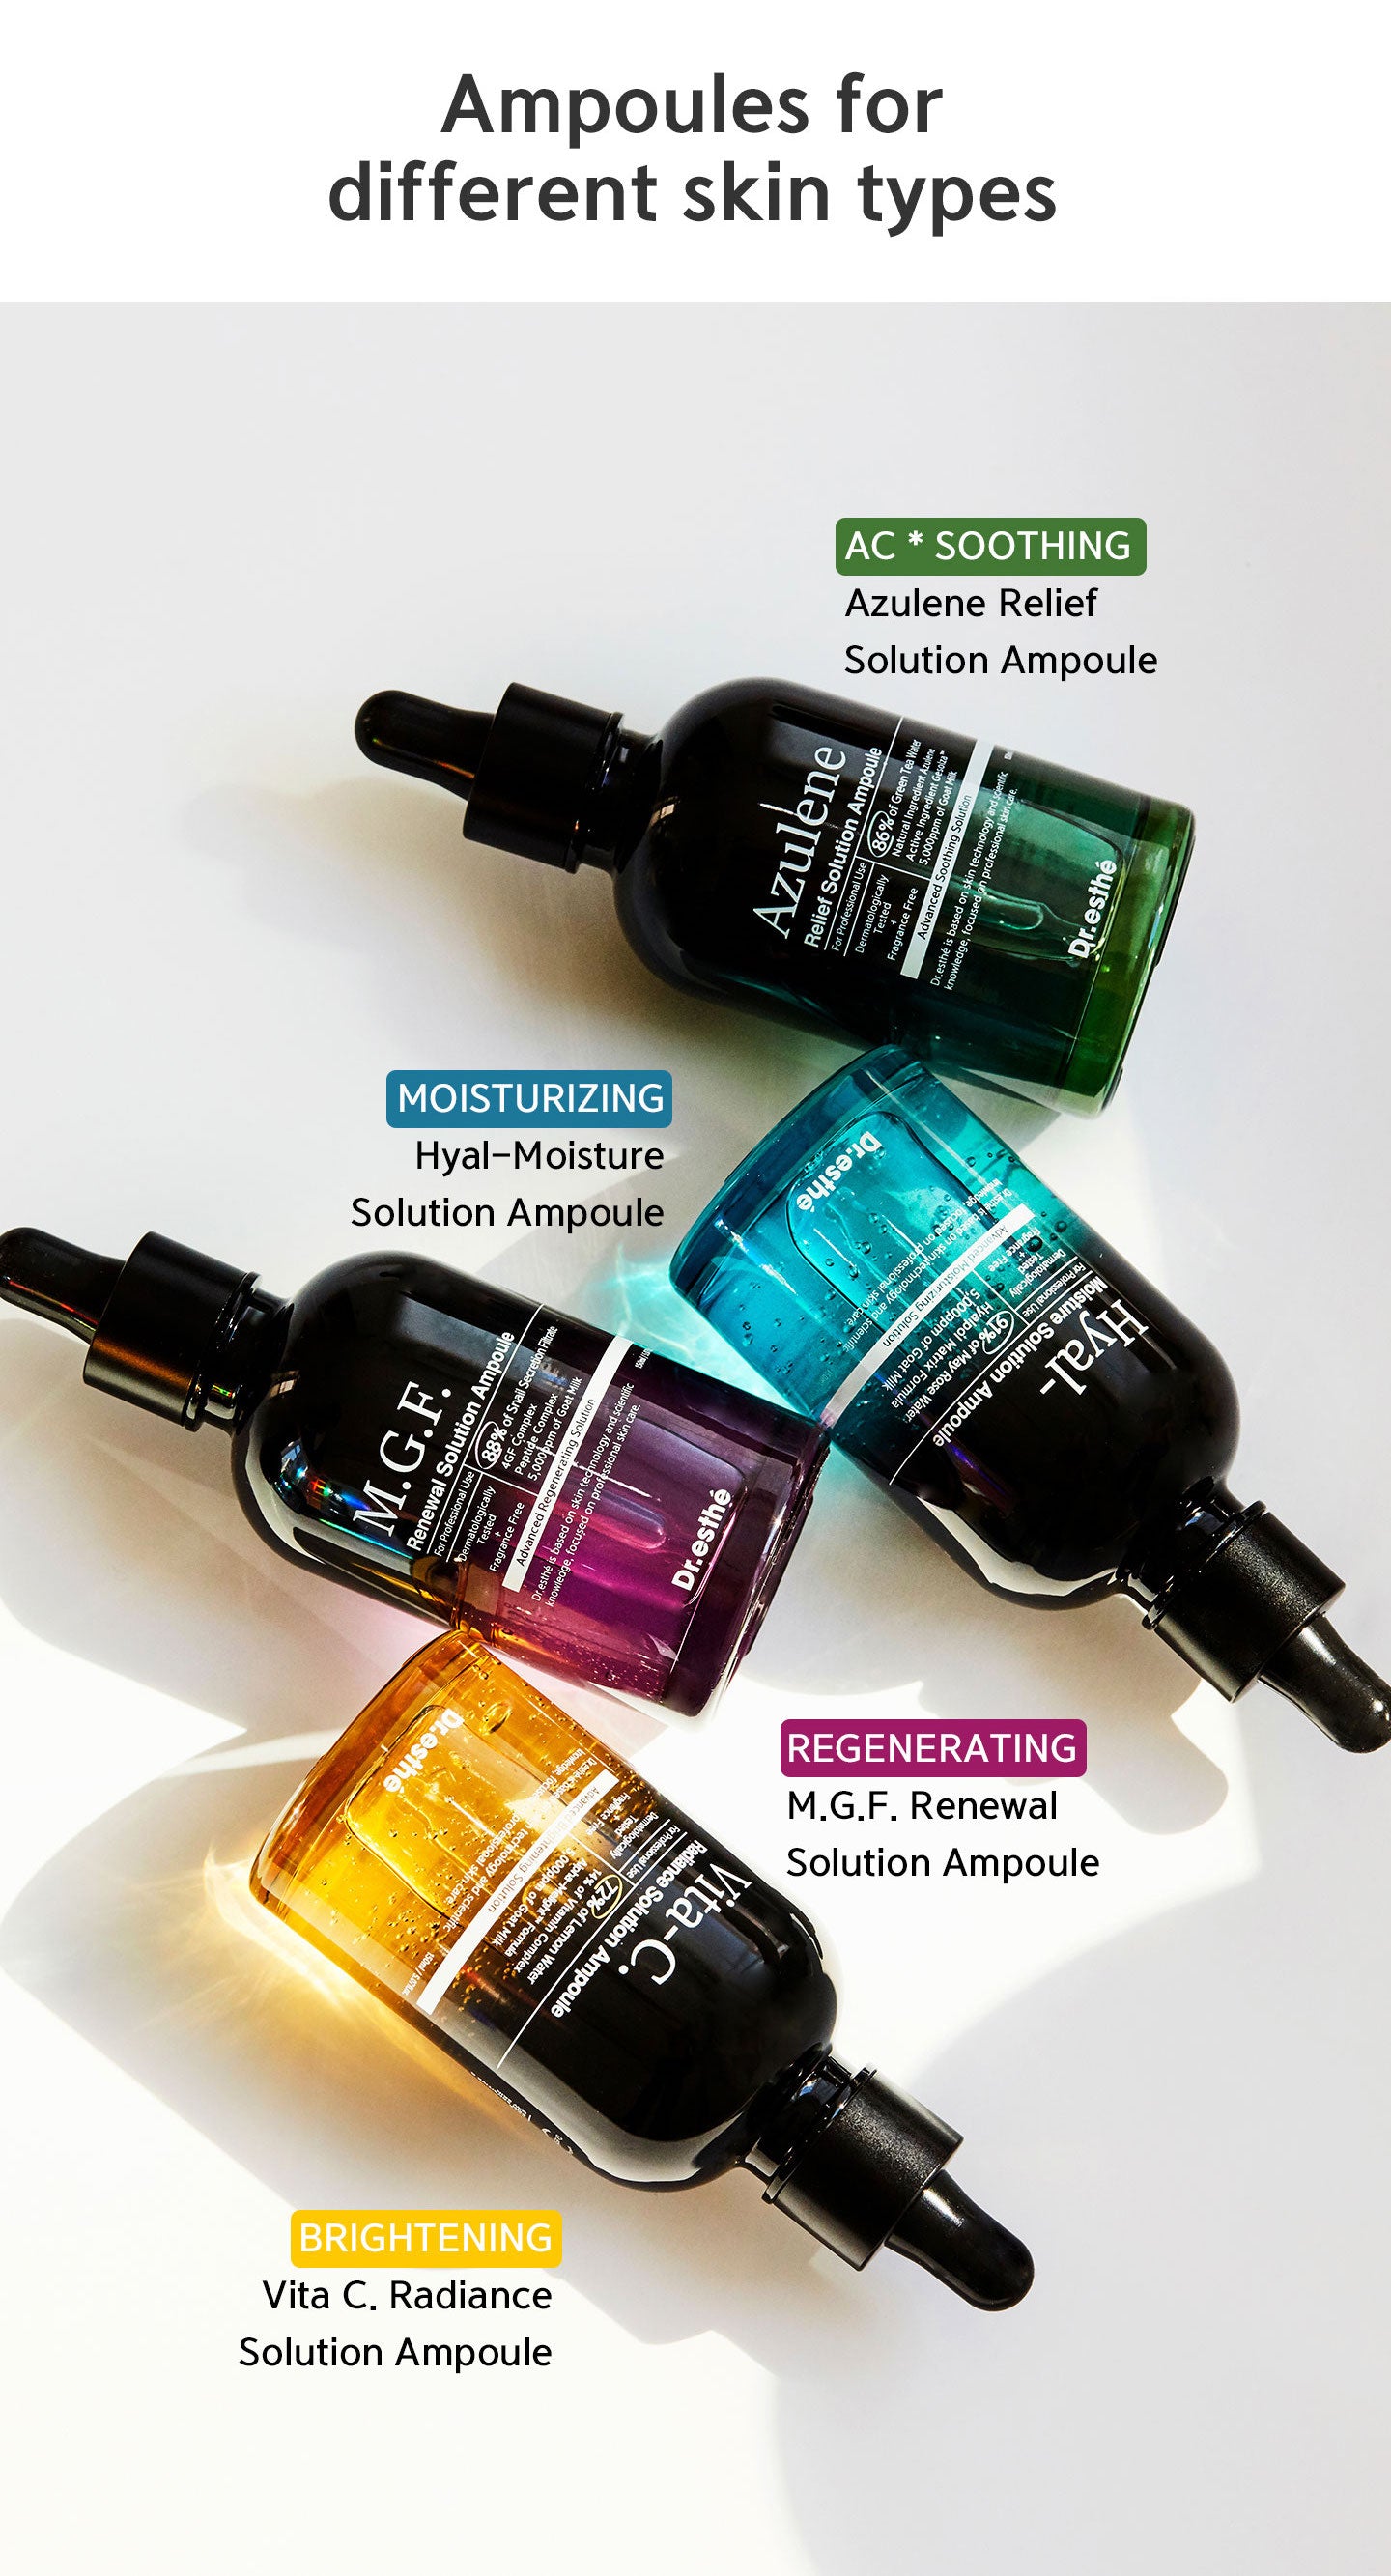 Ampoules for different skin types. 